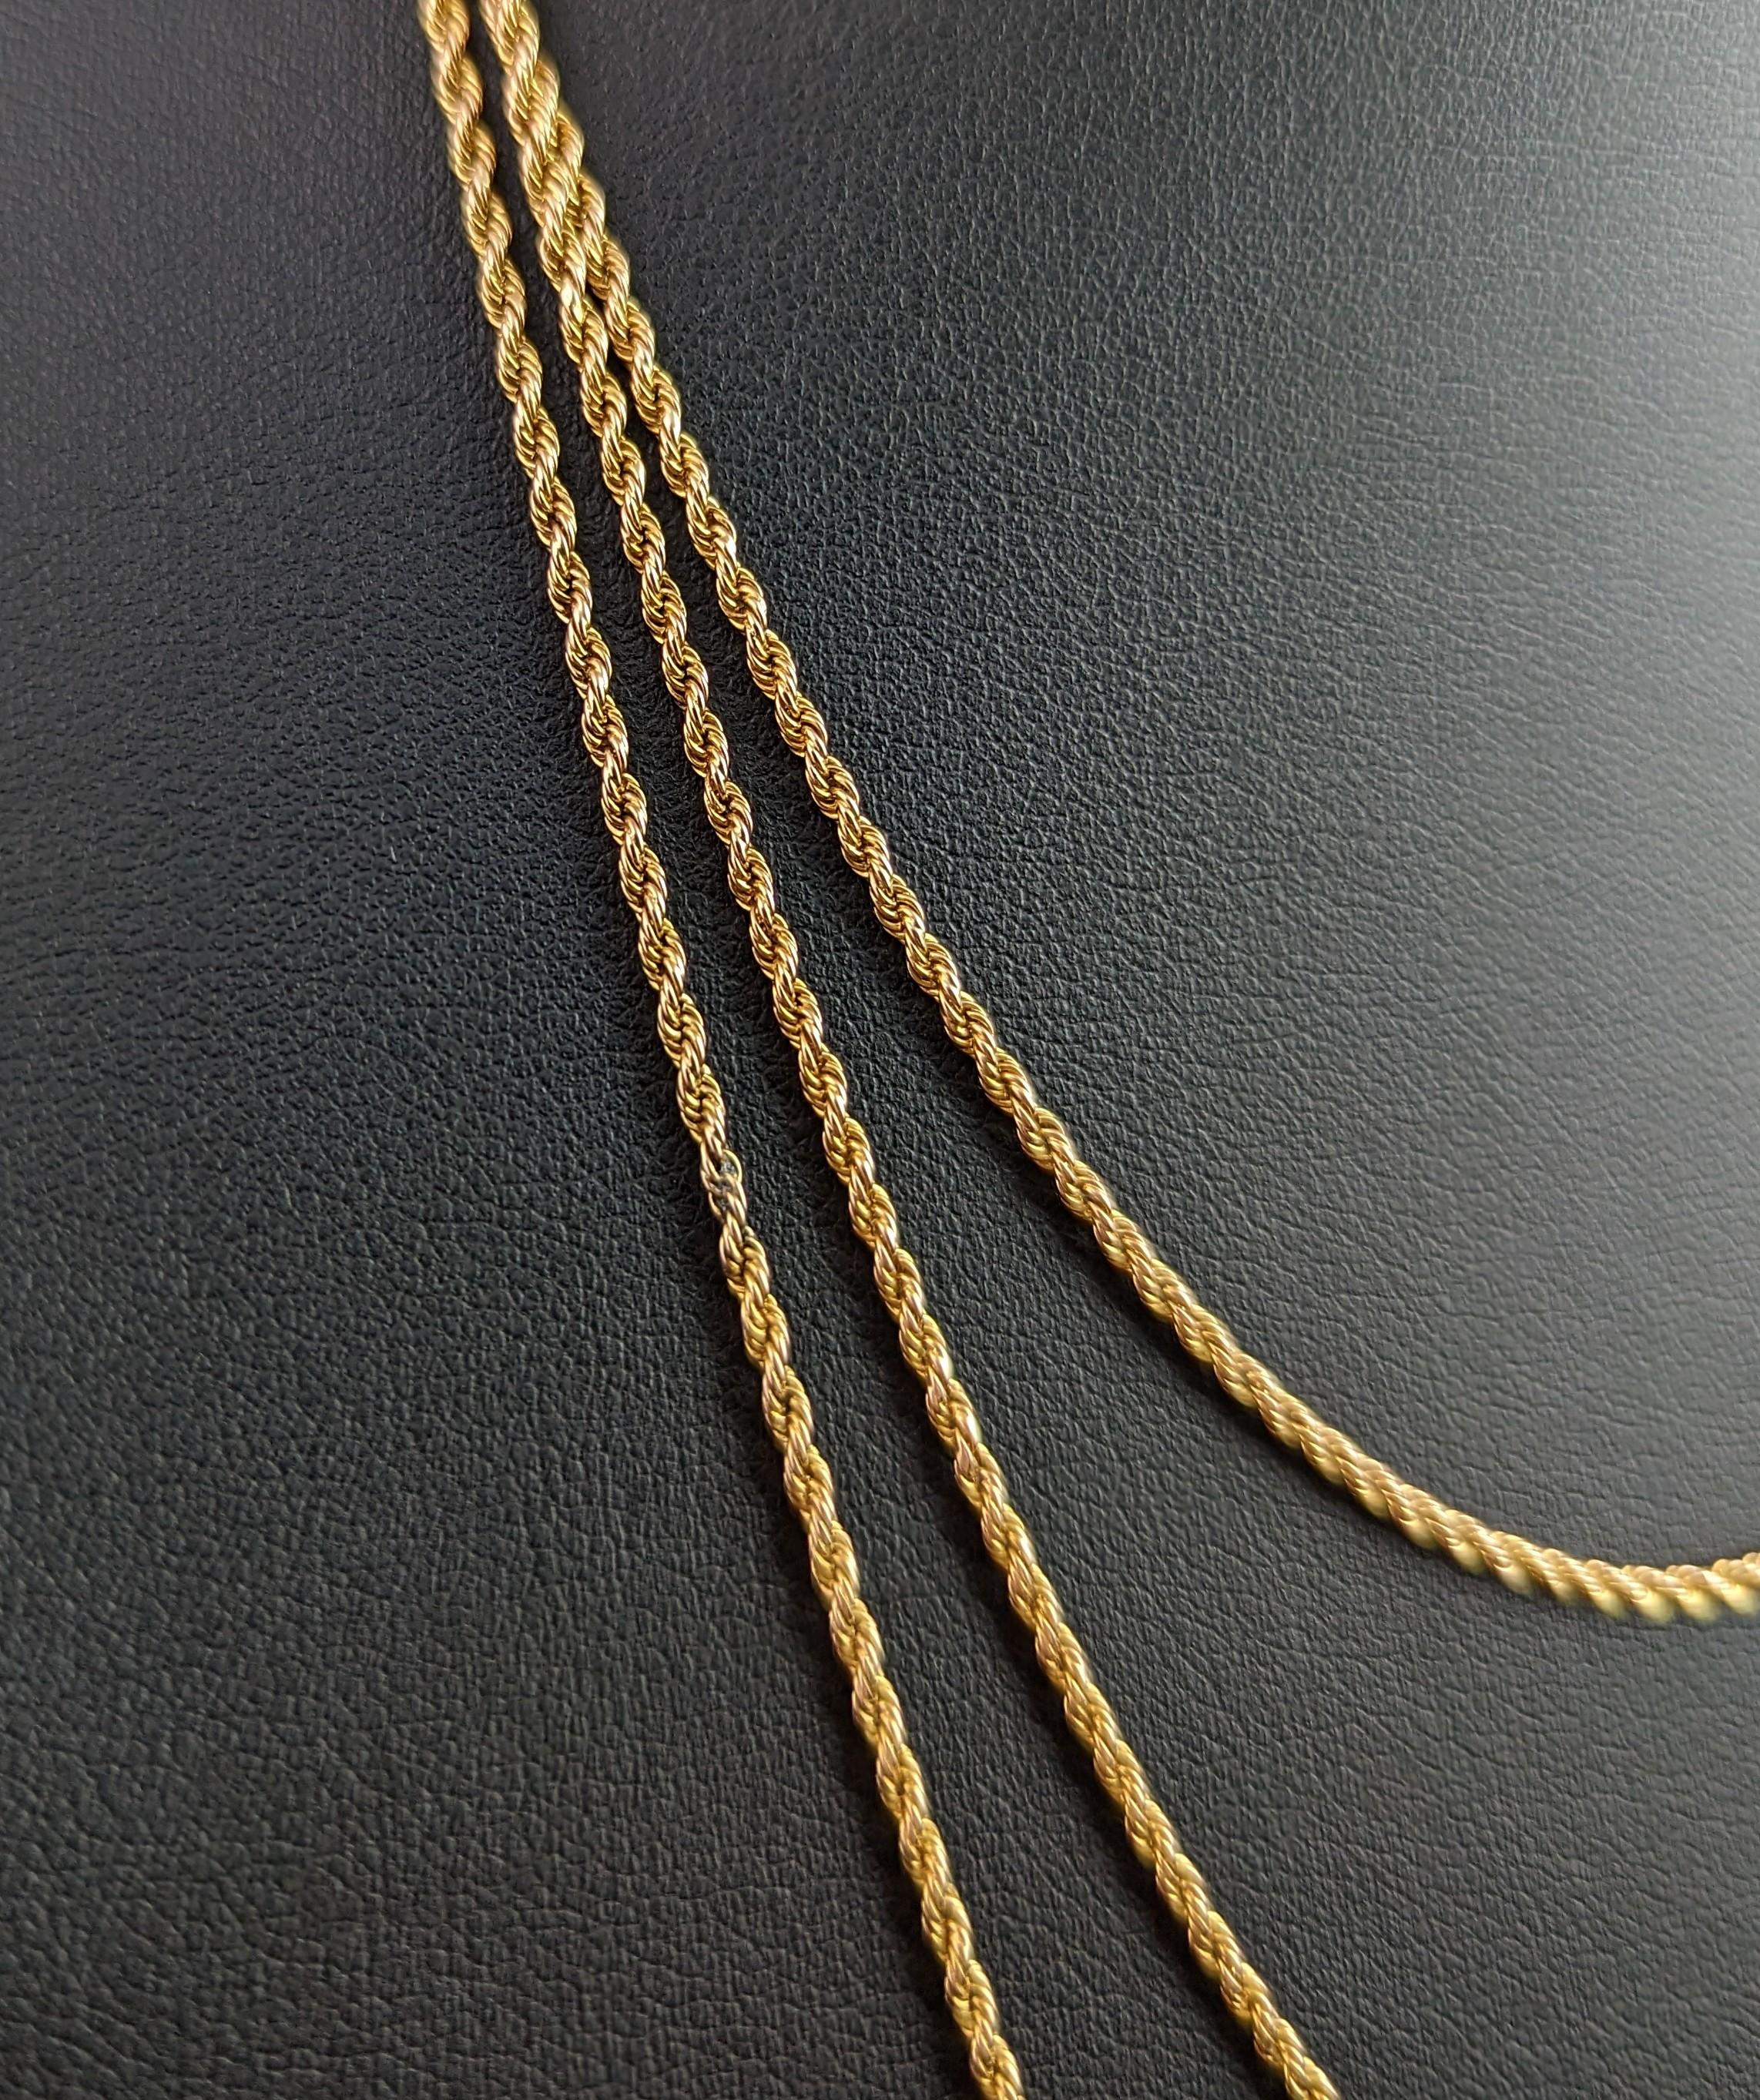 Antique 15k Yellow Gold Long Chain Necklace, Longuard, Rope Twist Link For Sale 6